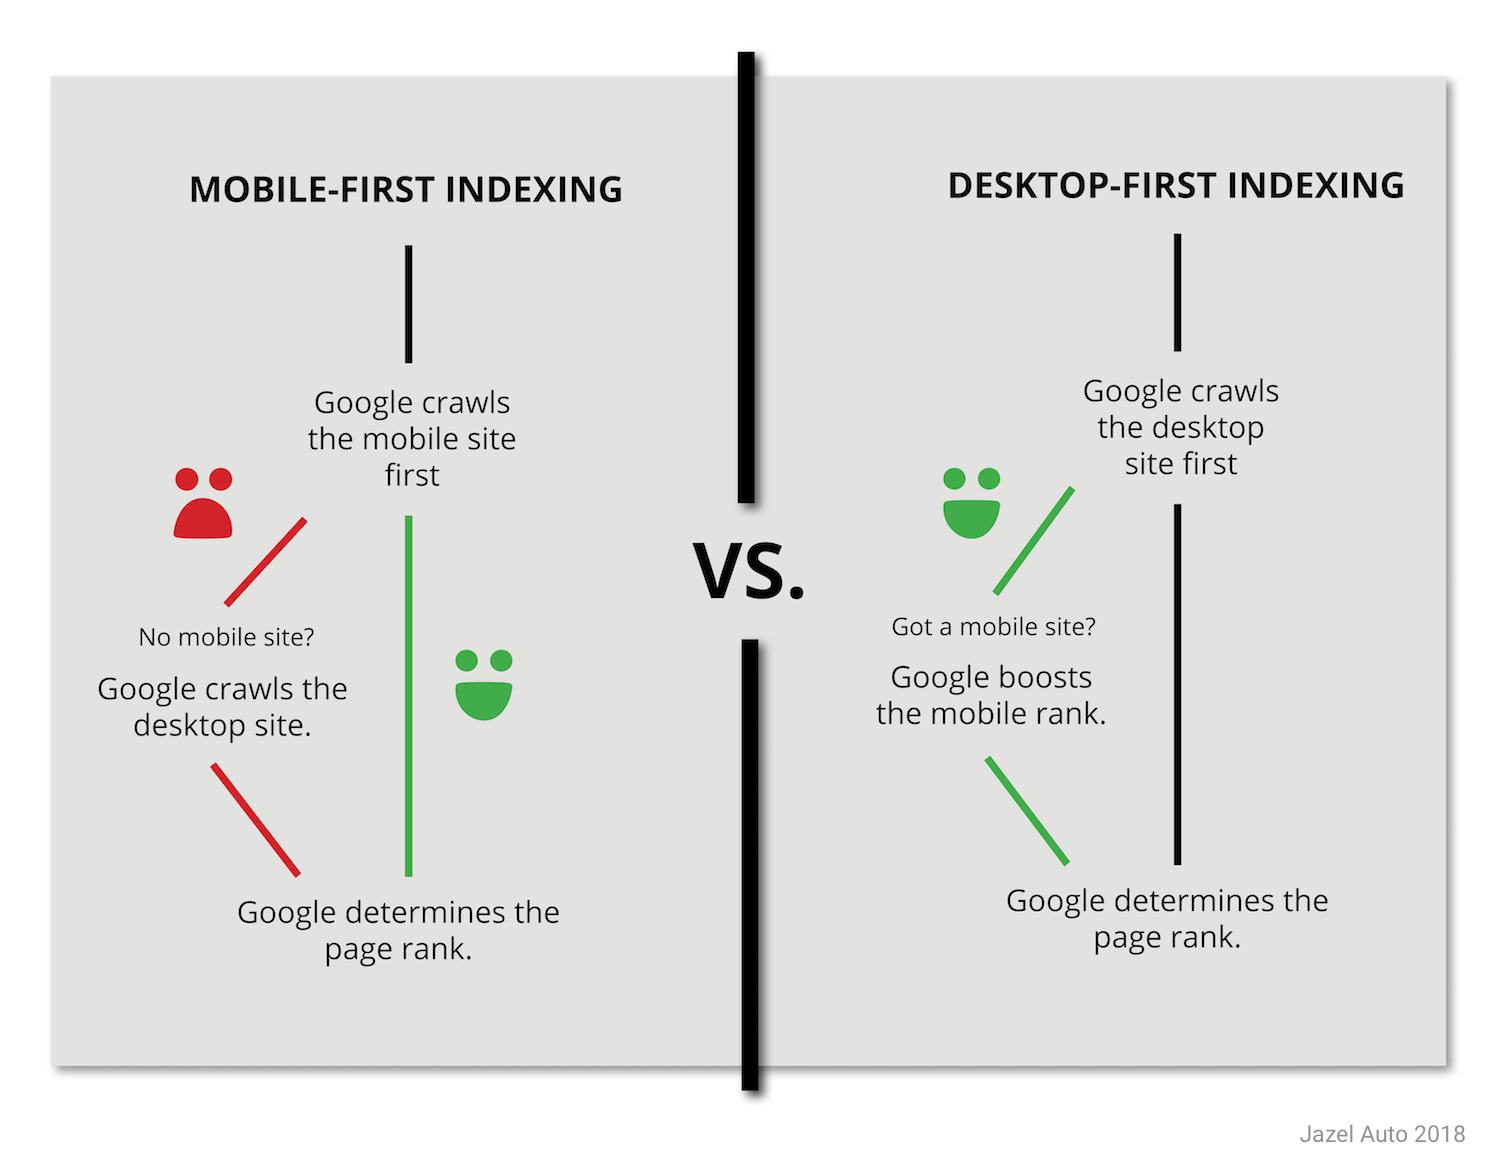 A graphic showing how mobile-first indexing works